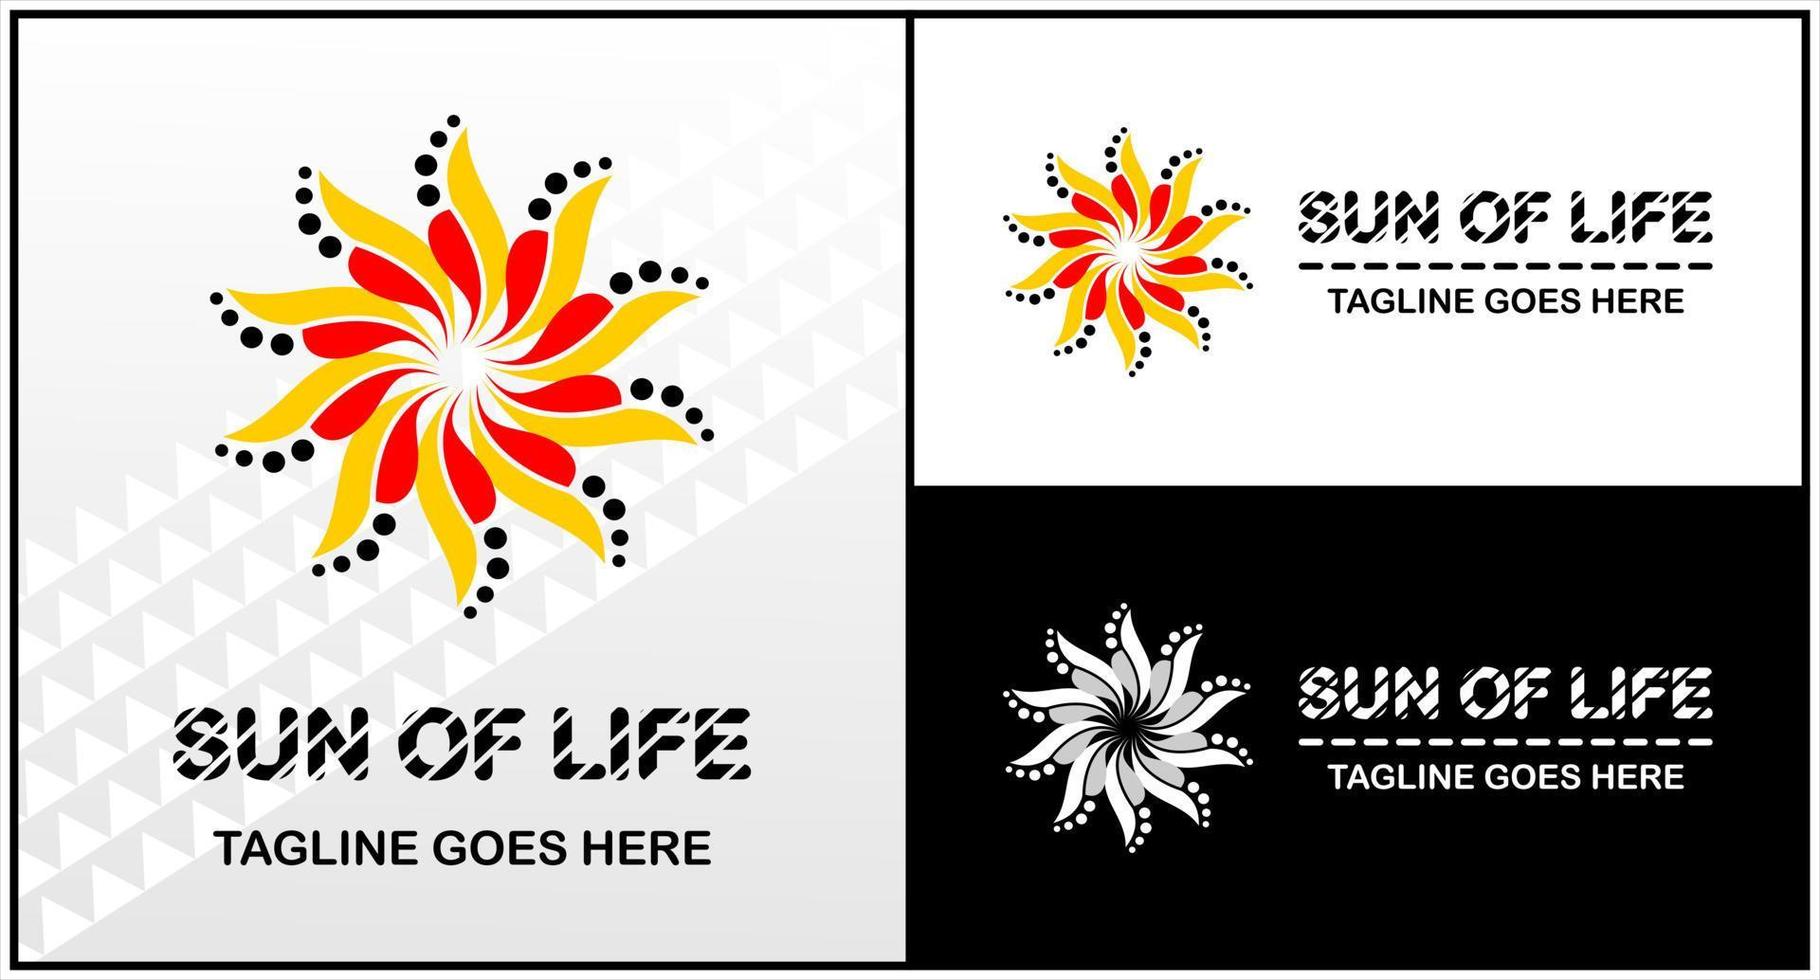 Vector design elements for your company logo, logo for groups or individuals, sun flower sparks and dots logo, modern, simple and minimalist logotype, matches the logo you want